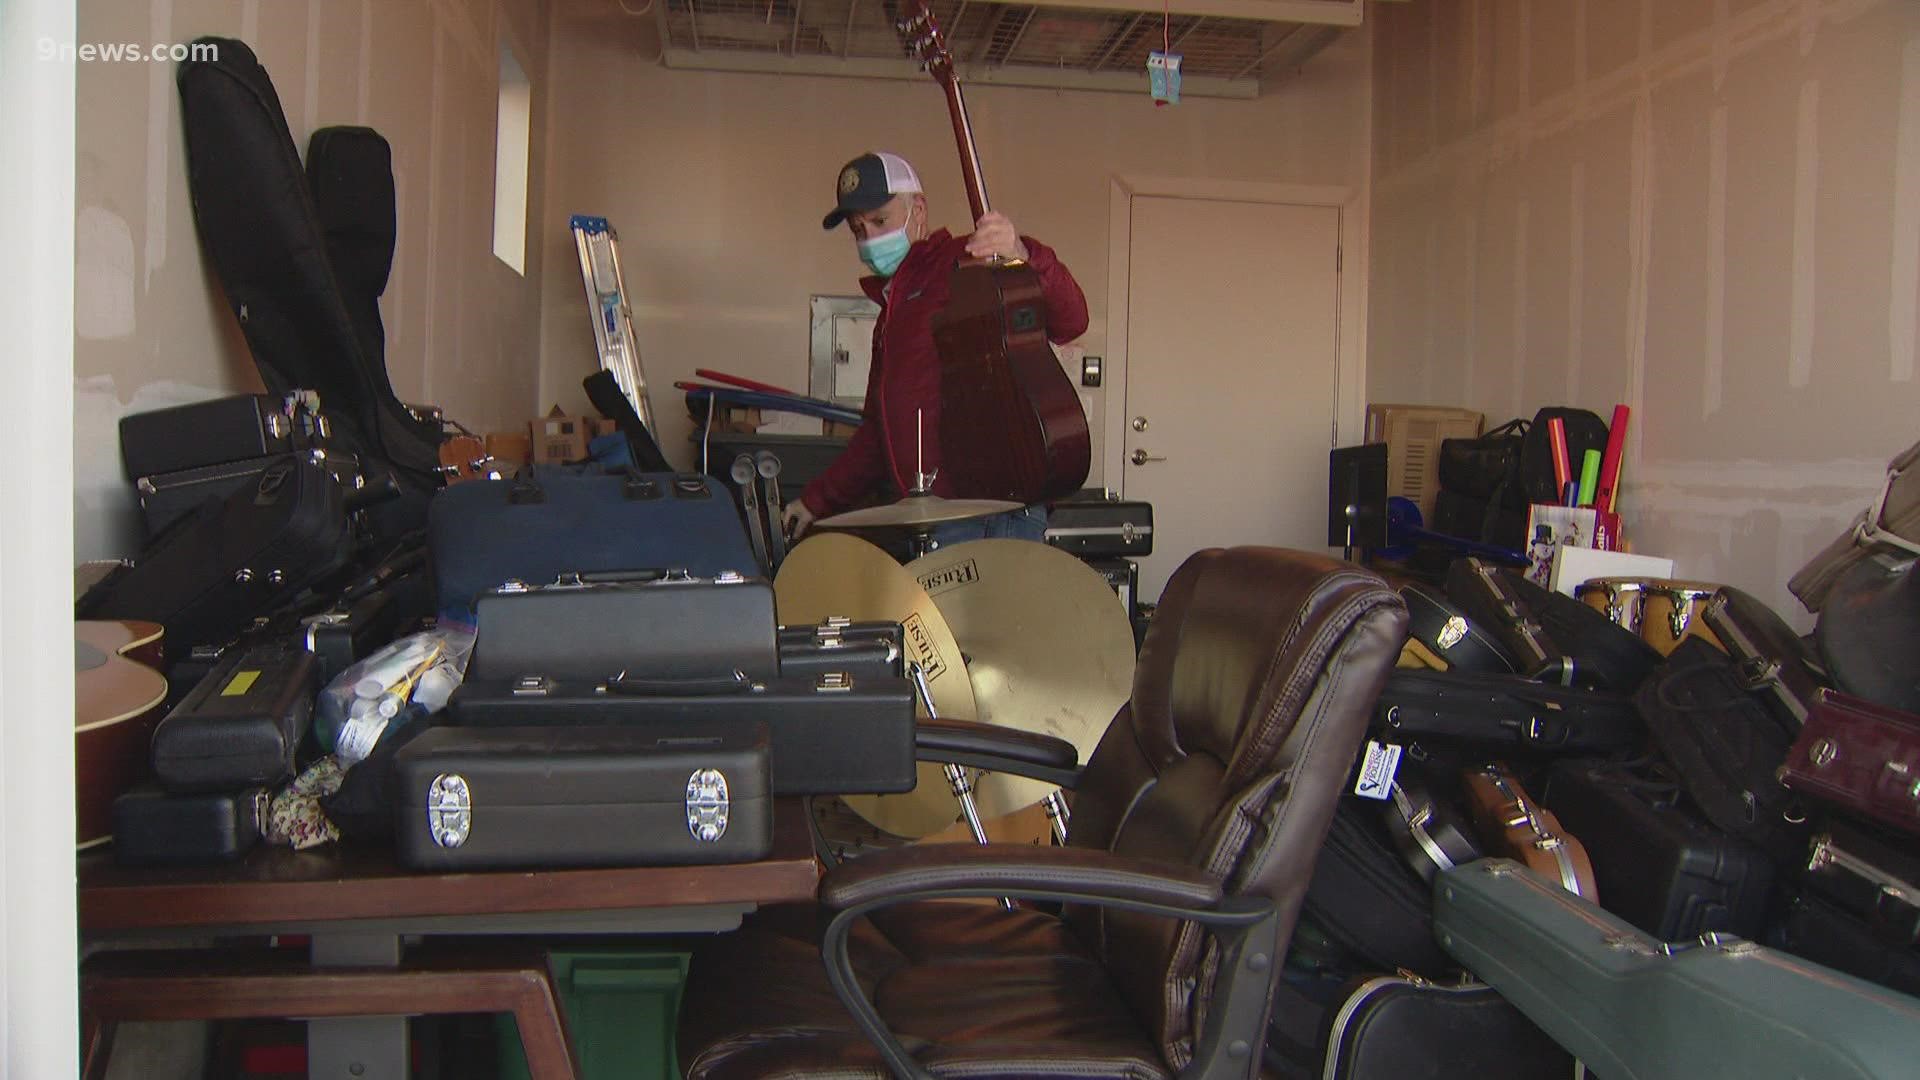 Travis Albright's neighbors have dropped off so many instruments that he ran out of space in his garage and is now storing them in his kitchen and basement.